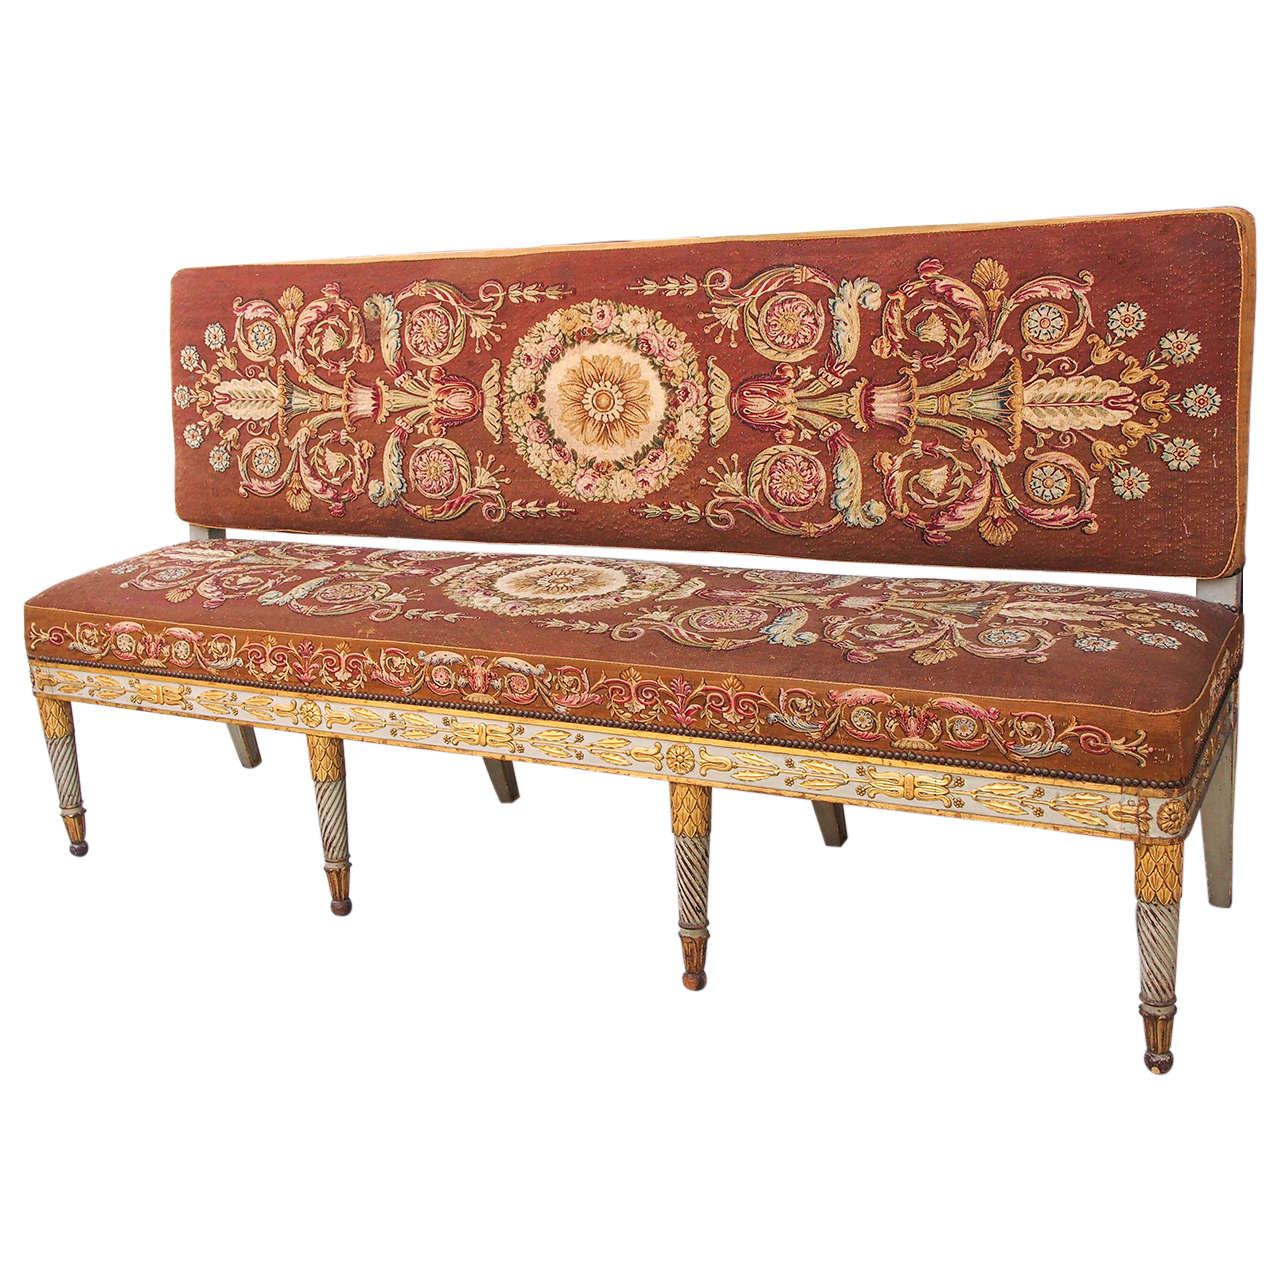 Exceptional French Empire Aubusson Covered Hall Bench